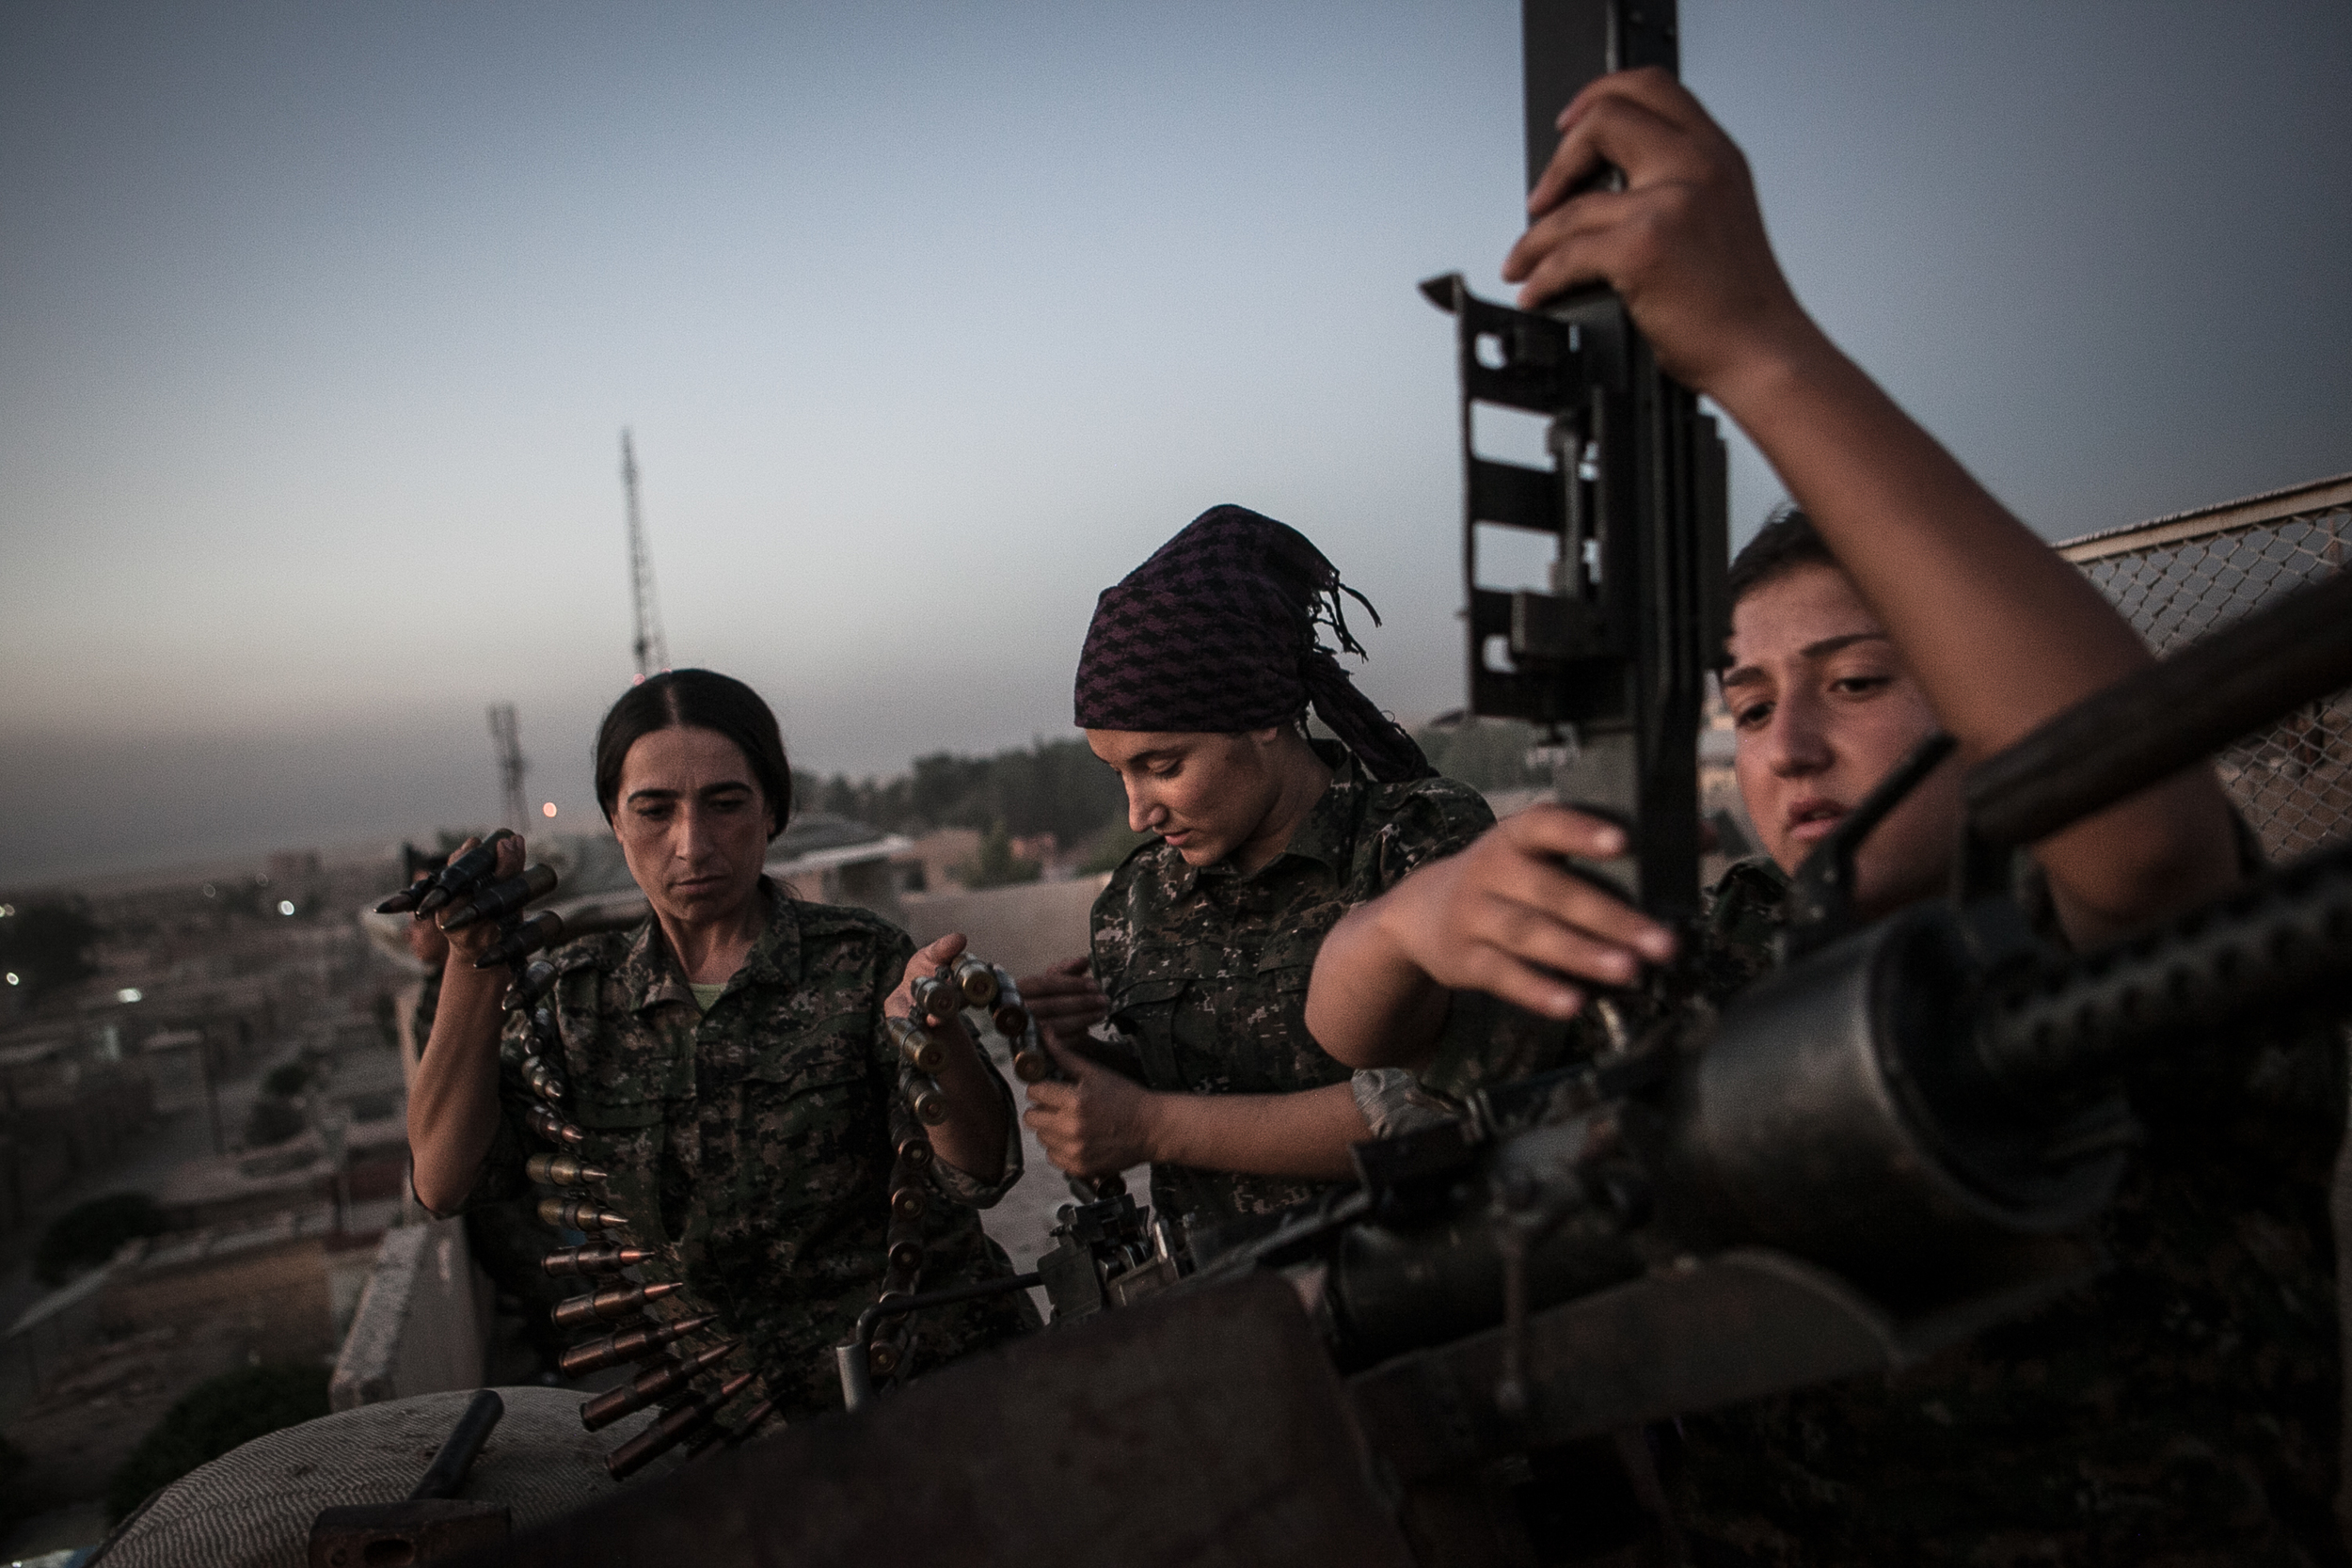  Captain Ronahi Anduk, 34, left, Gian Dirik, center, and Dirsim Judi, 18, right, fix the DShK weapon at a YPJ military base in Til Kocer, Syria. The DShK weapon is a Soviet machine gun typically used as an anti-aircraft wepaon, but the YPJ use it to 